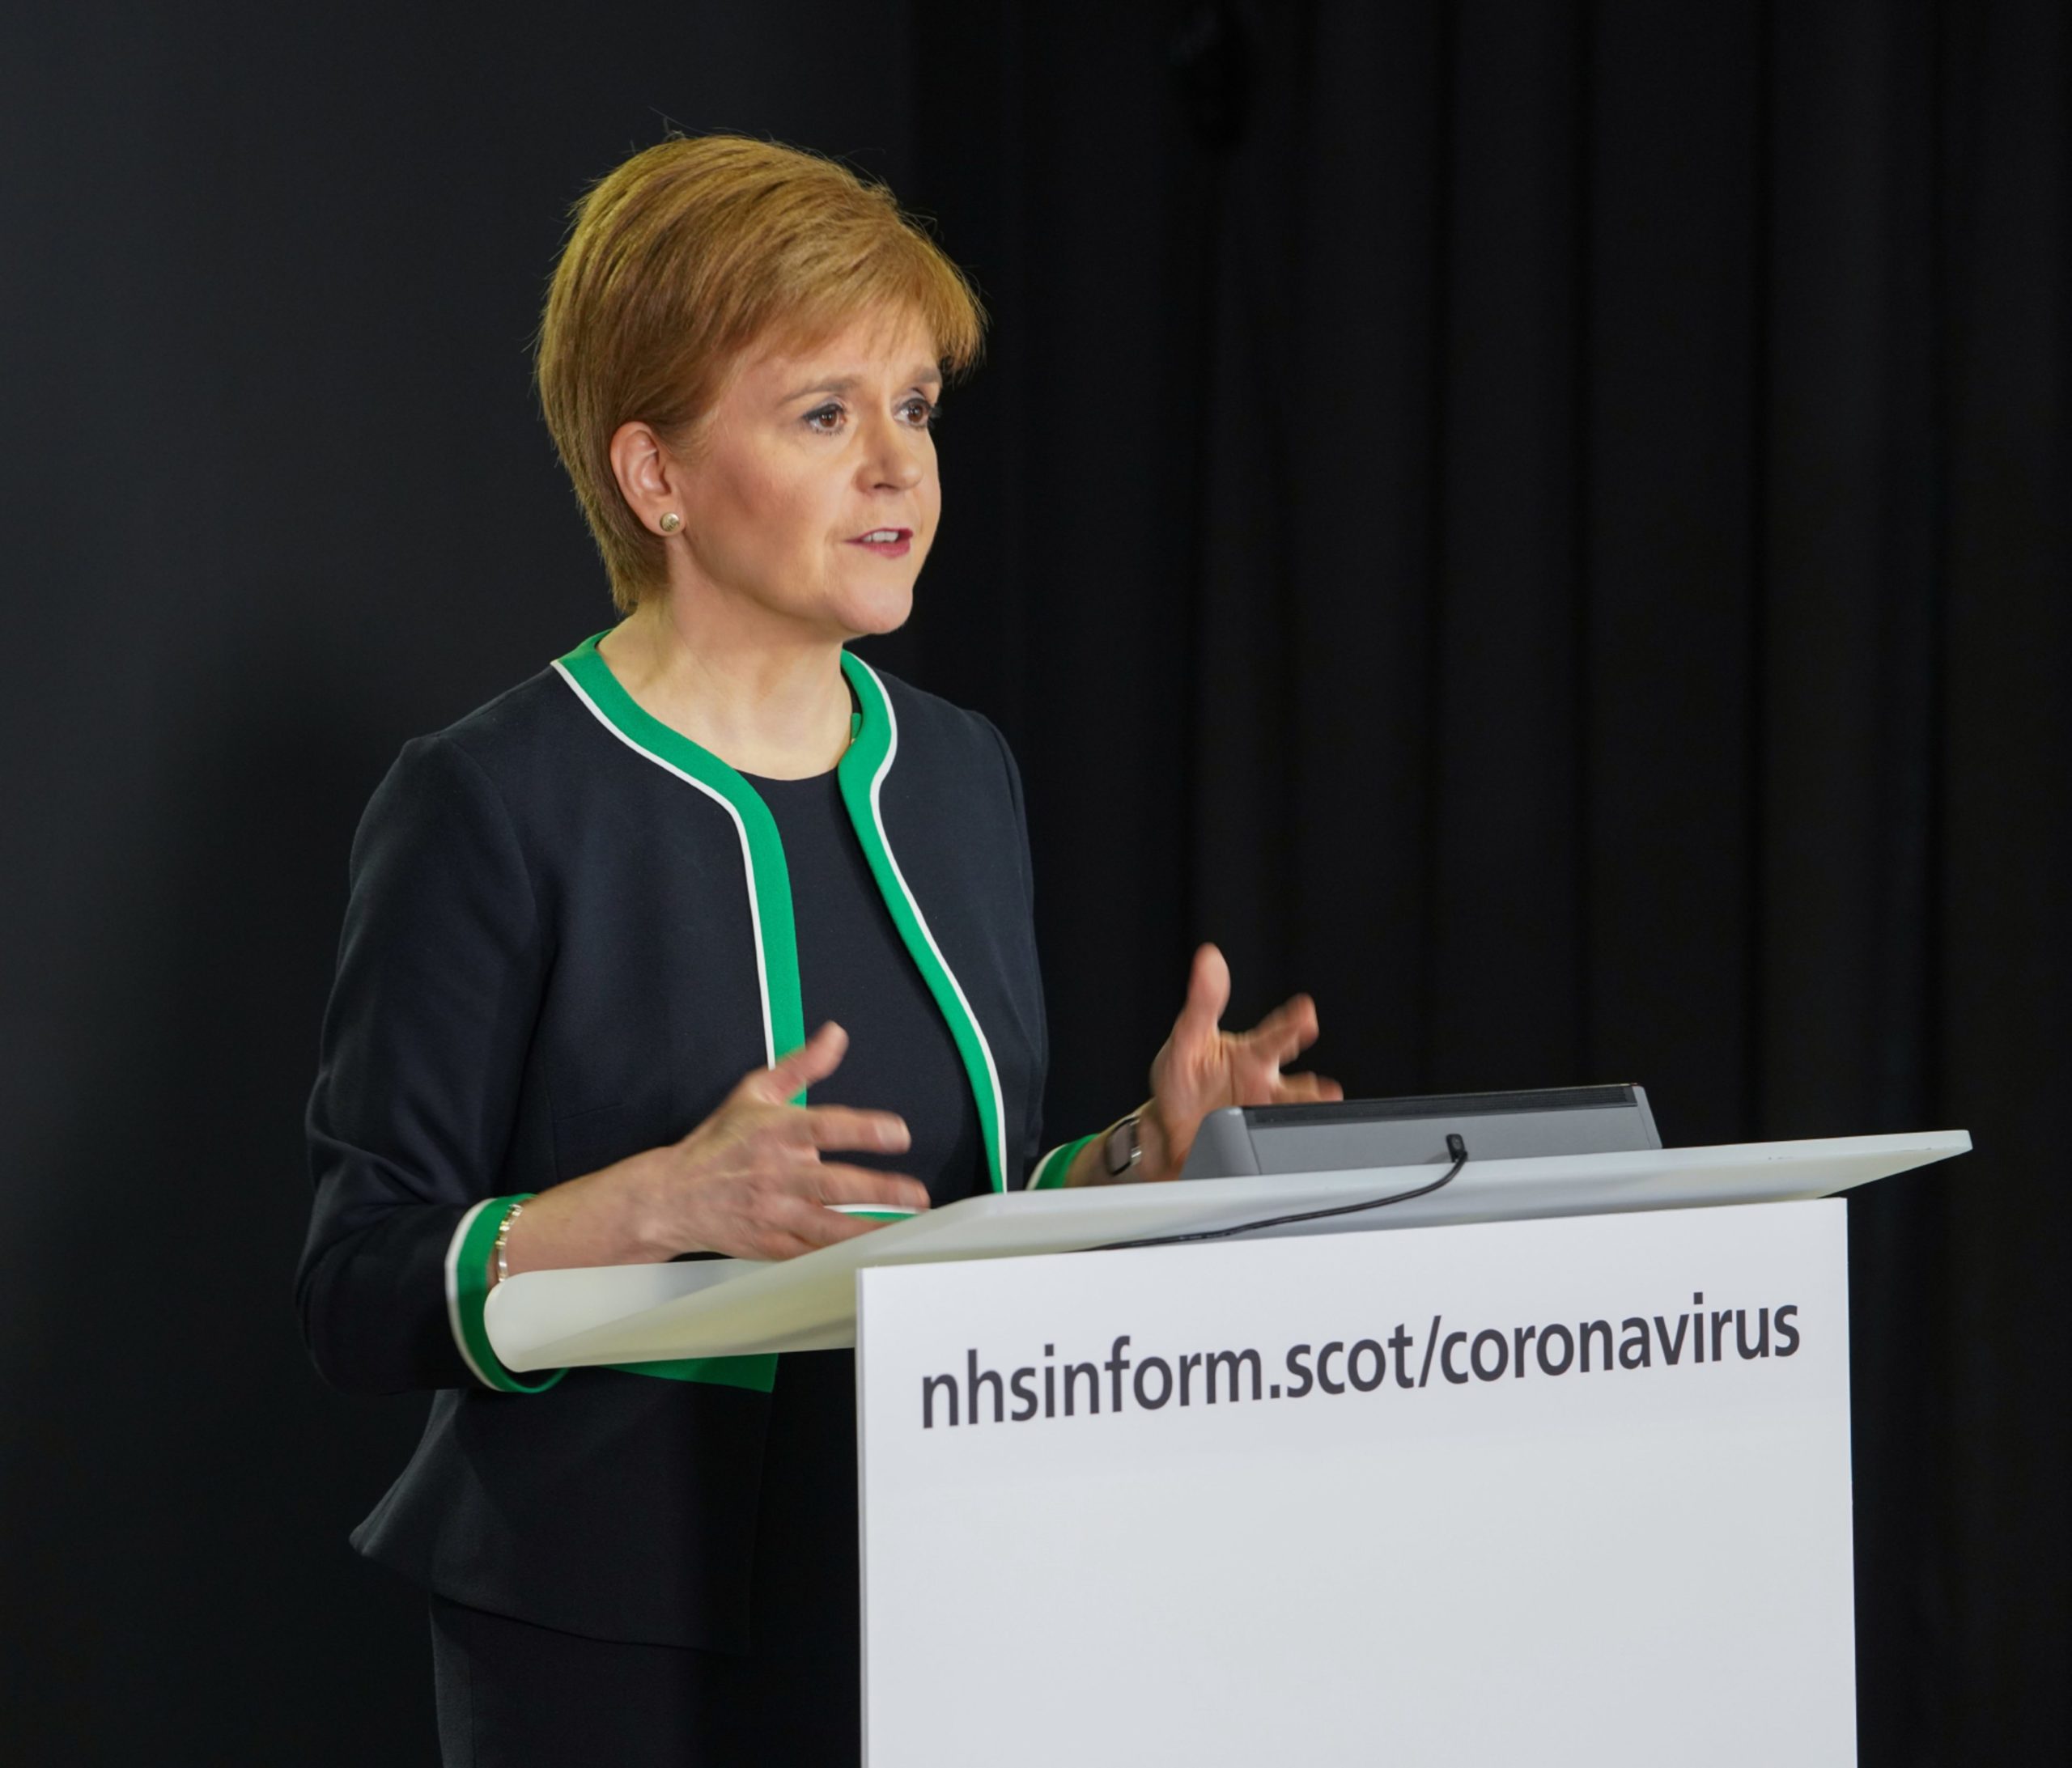 COVID-19 press conference - 8 April 2020
Scottish Government COVID-19 press conference at St. Andrew's House, Edinburgh with the First Minister, Nicola Sturgeon, Health Secretary, Jeanne Freeman and Deputy Chief Medical Officer for Scotland, Dr Gregor Smith.

Image from SG Flickr